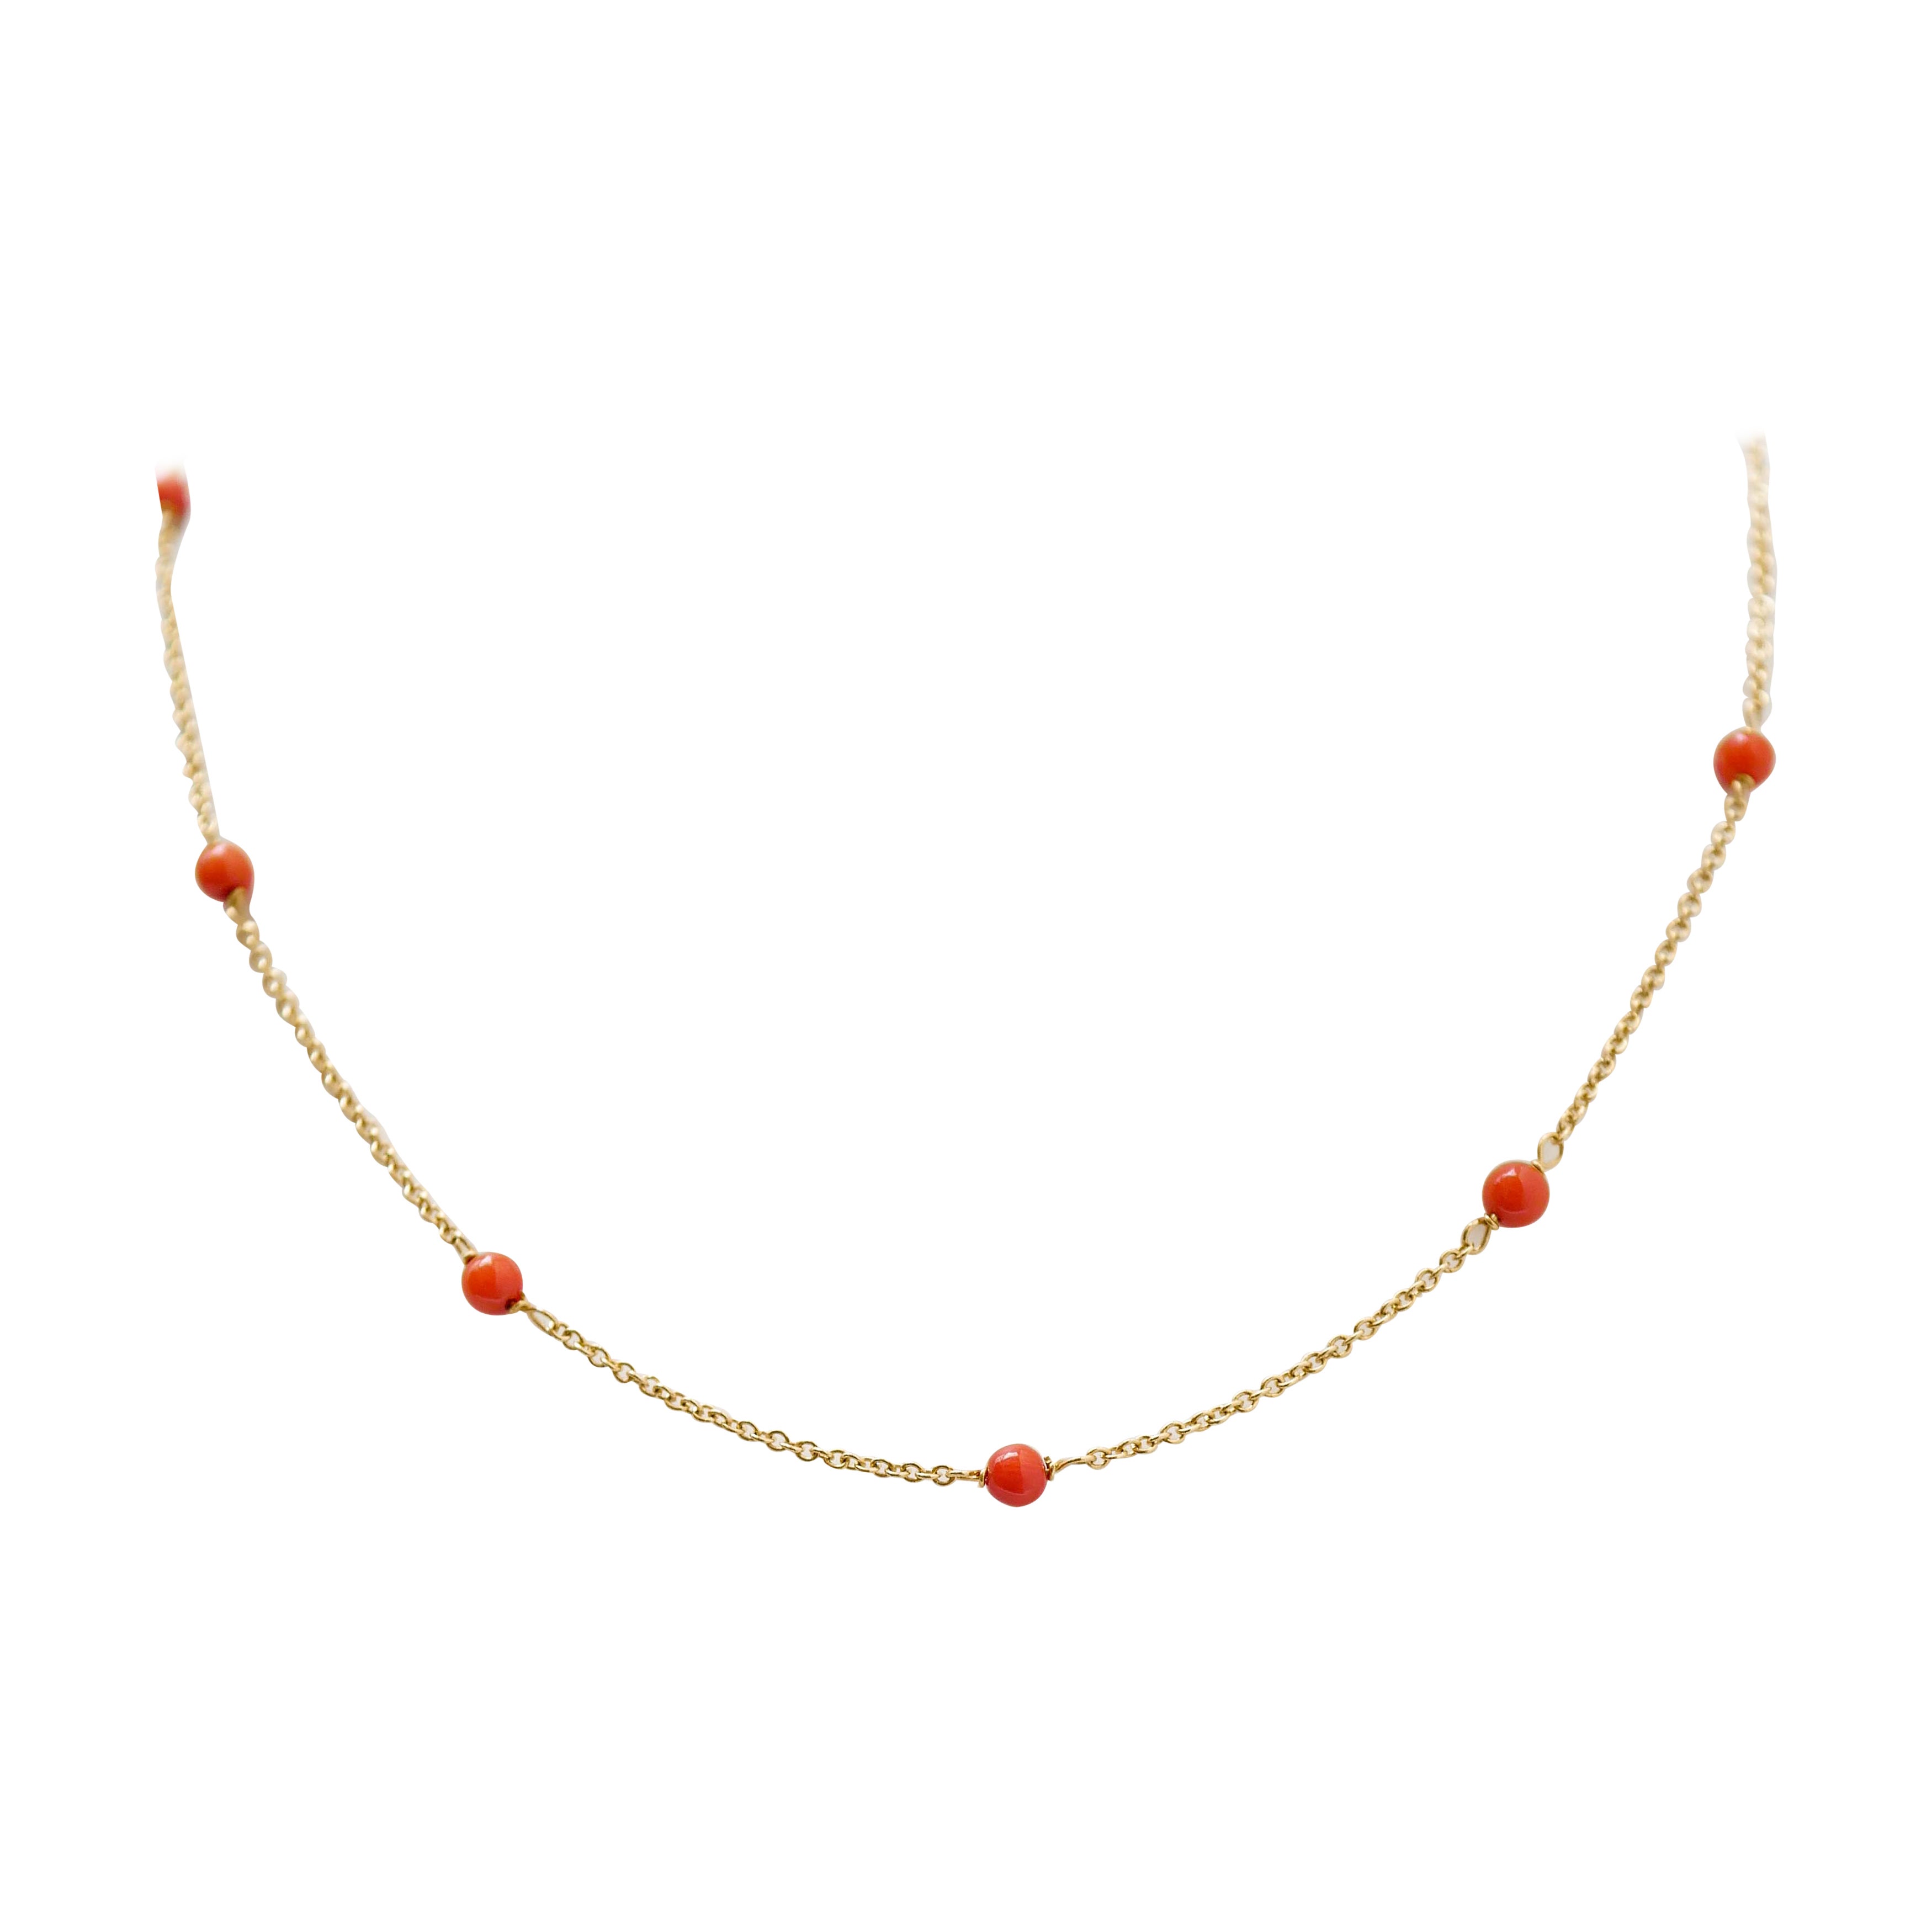 Coral, 18 Karat Yellow Gold Necklace. For Sale